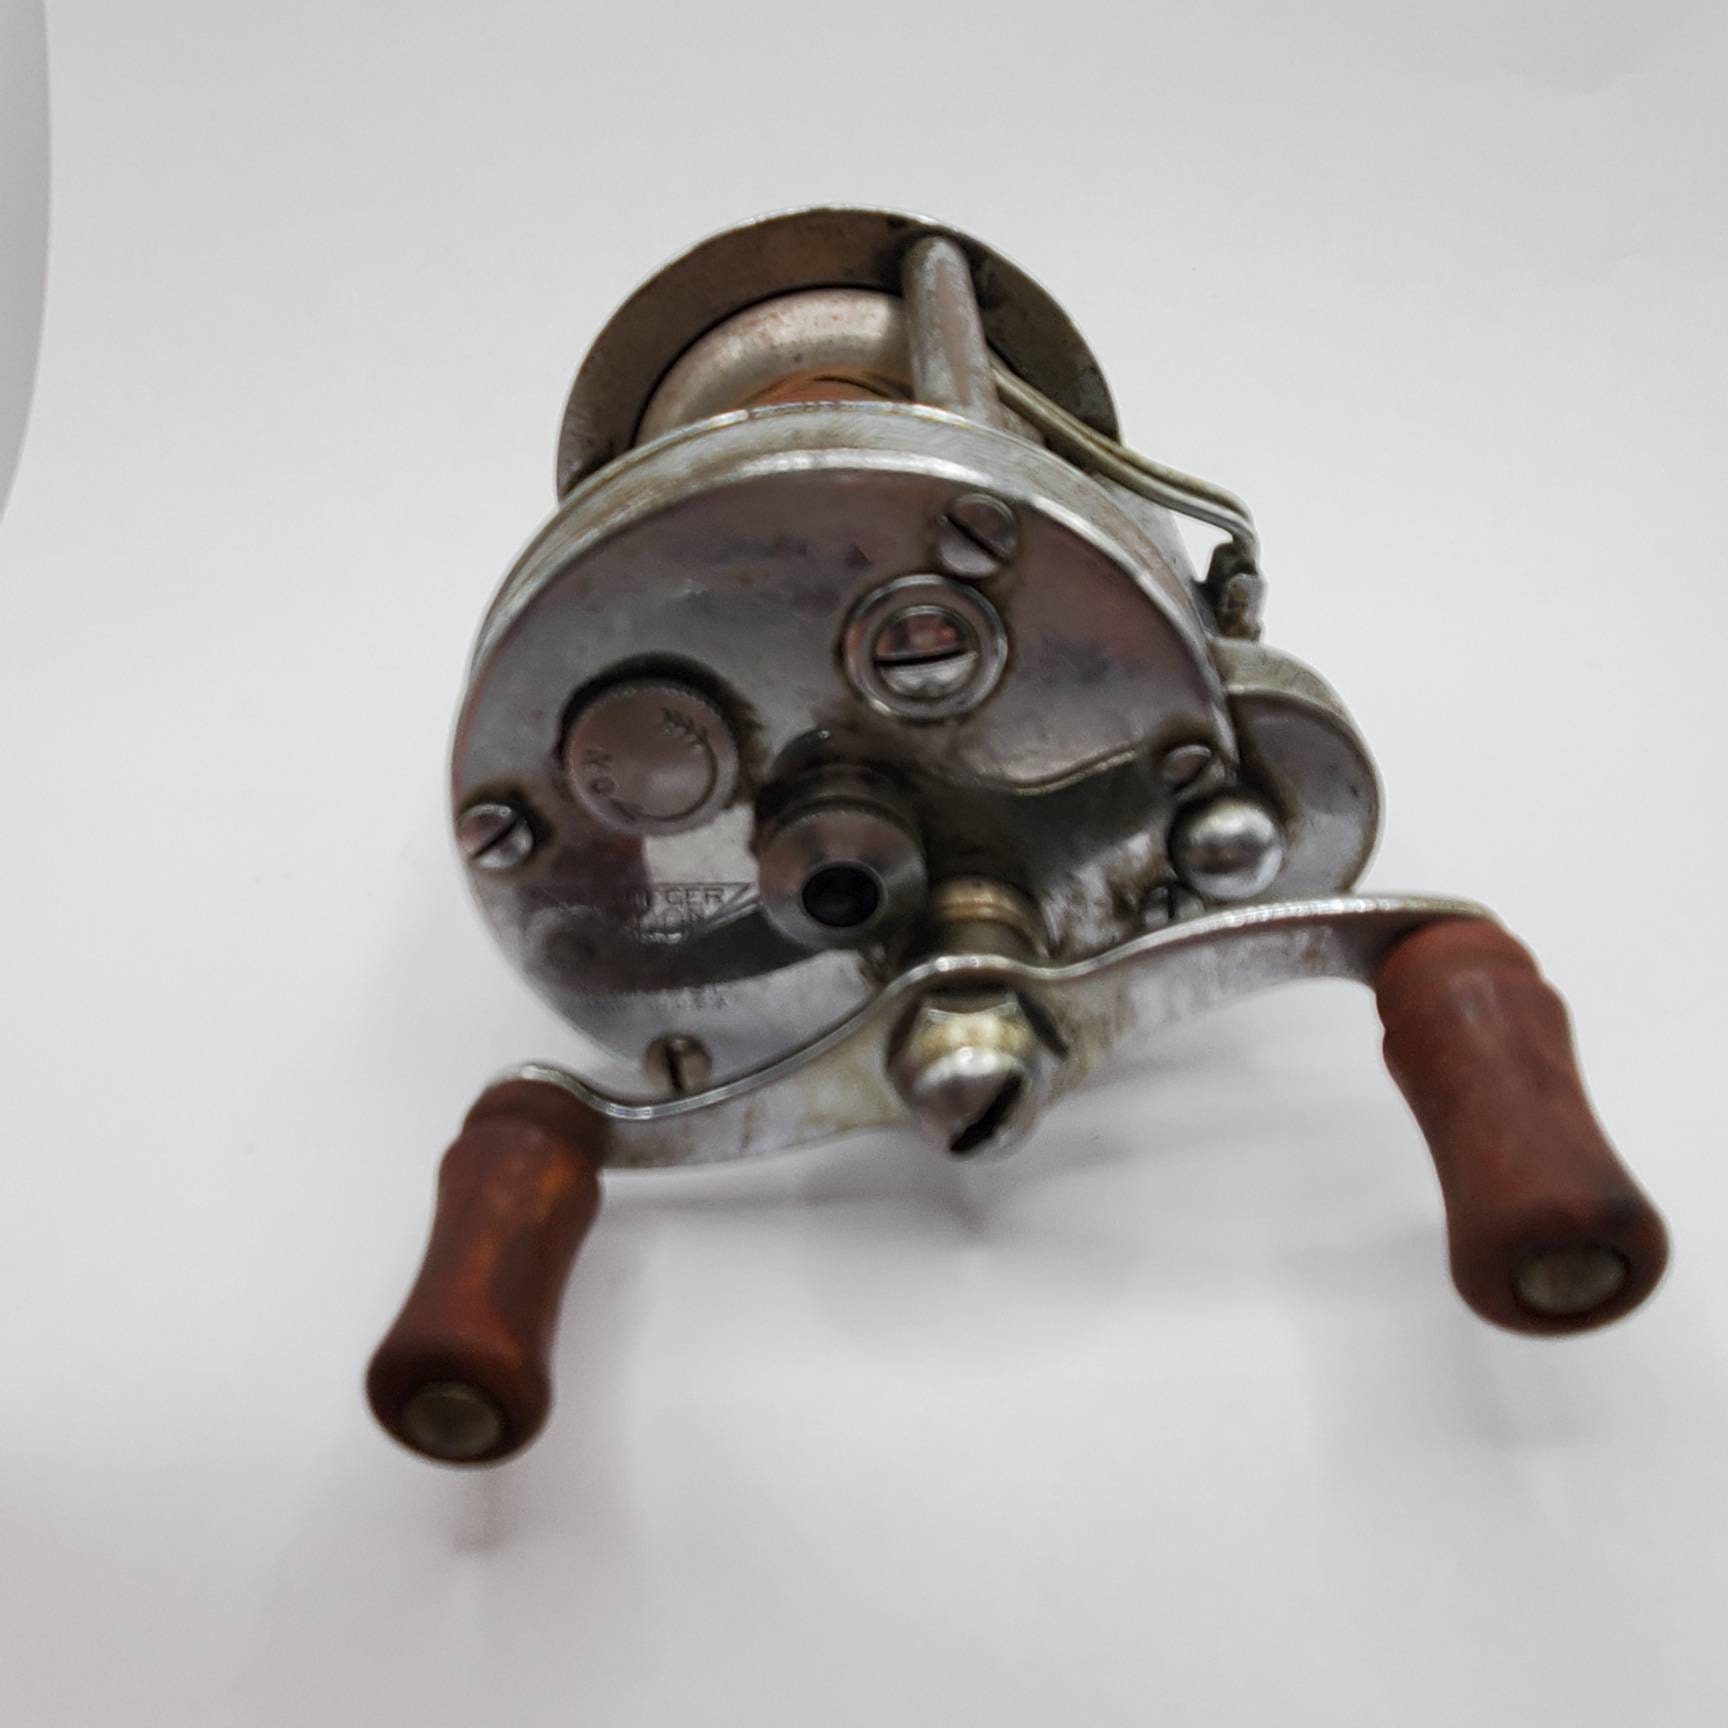 VINTAGE PFLUEGER AKRON No. 1893L Chrome Fishing Reel Casting Reel U S A  Collectible Sporting Goods 